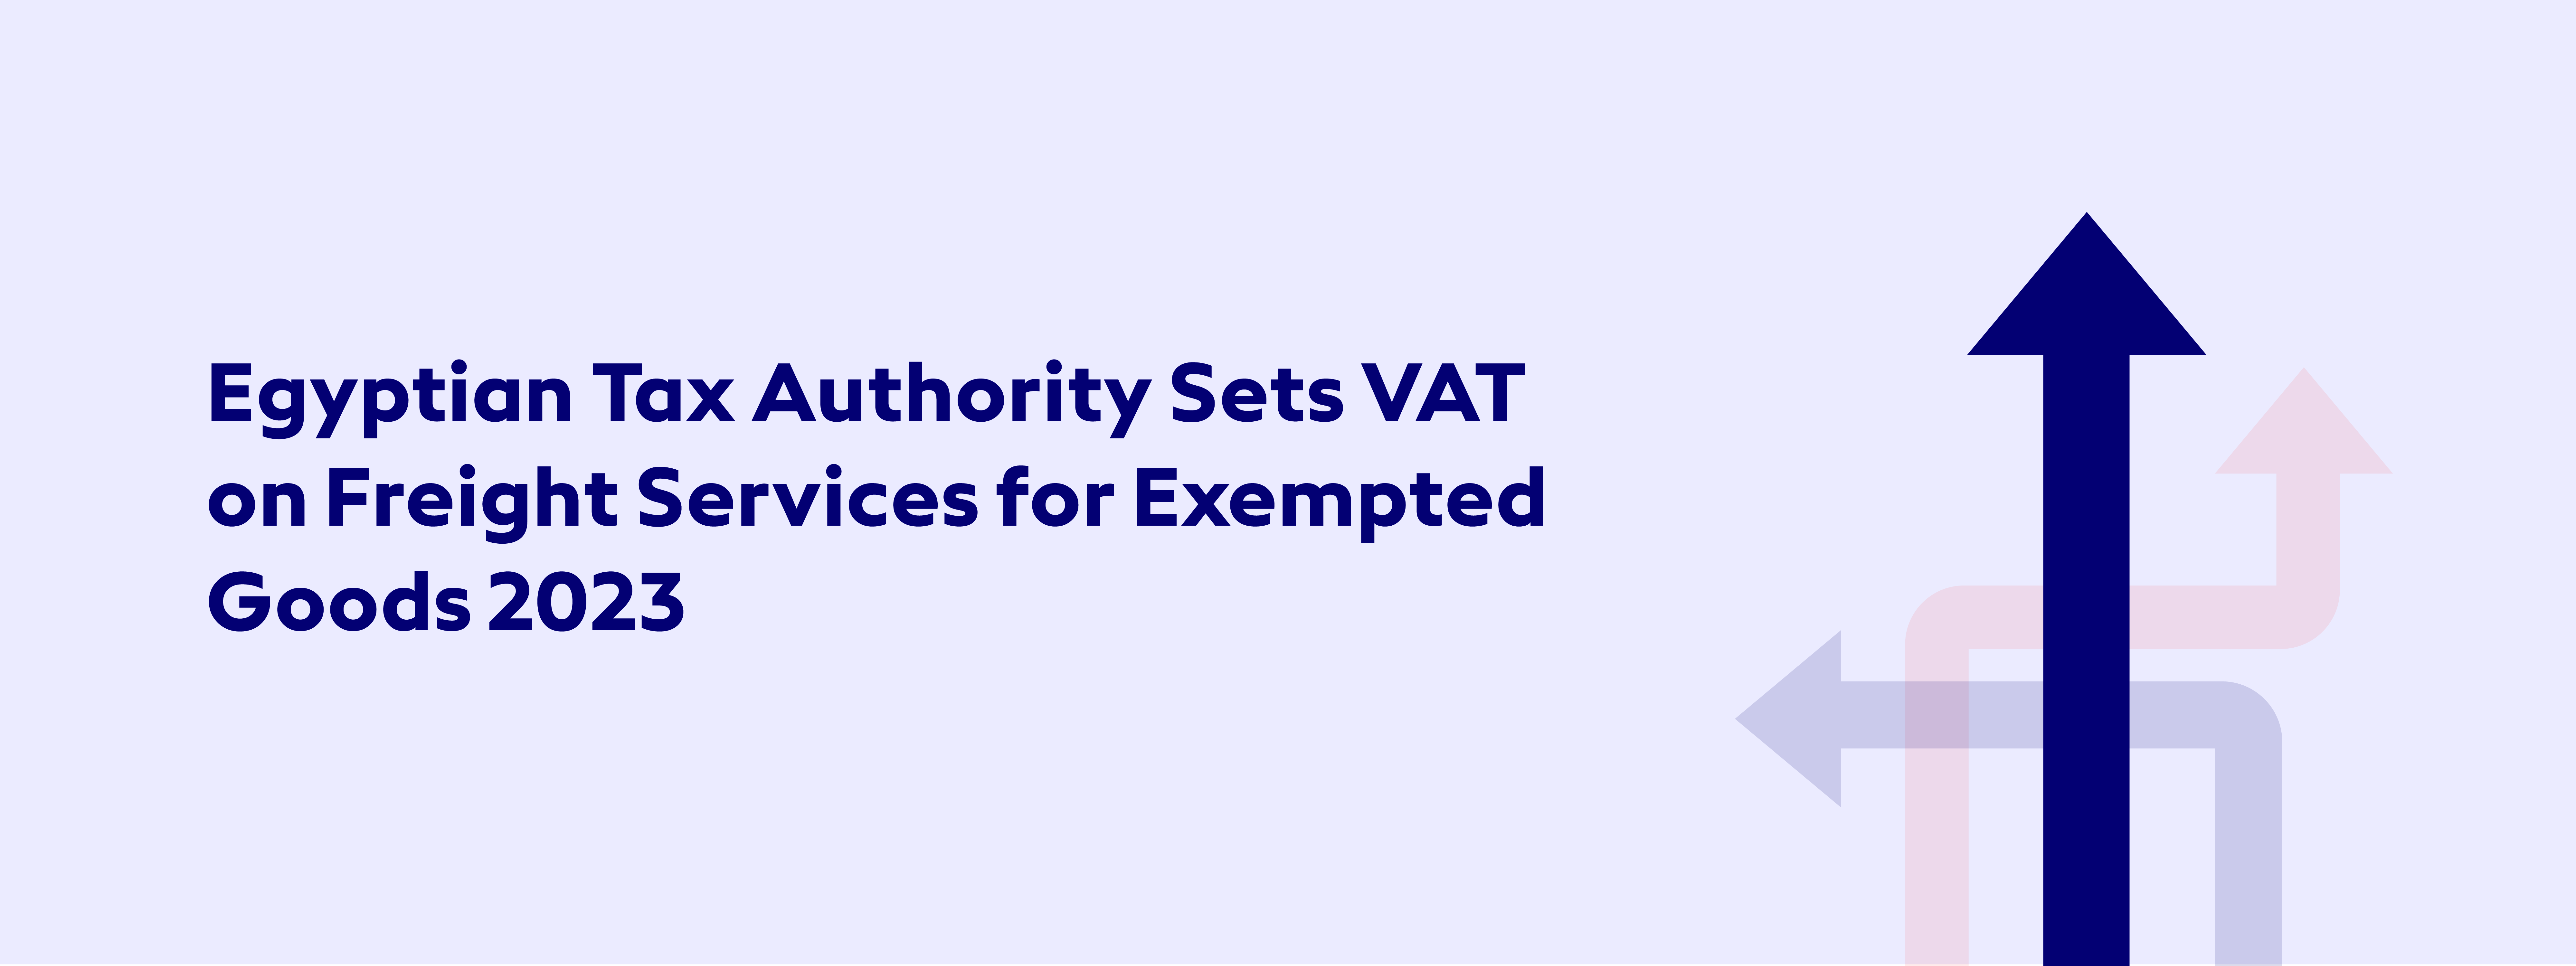 Egyptian Tax Authority Sets VAT on Freight Services for Exempted Goods 2023